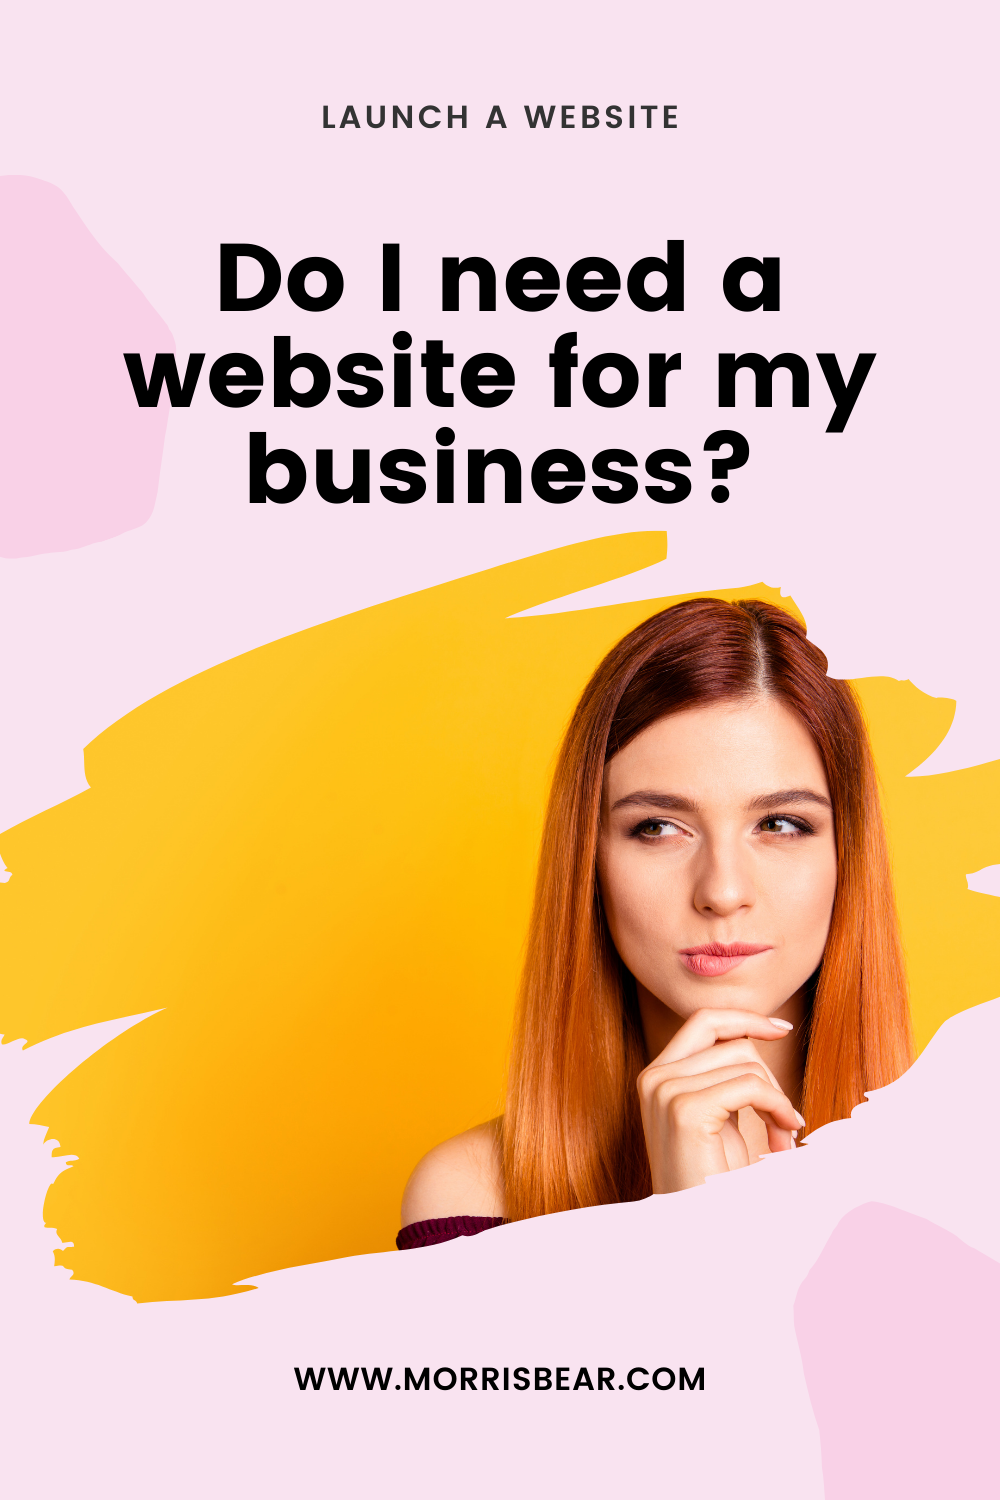 Do I need a website for my business? Here's 5 reasons it might be time to upgrade.